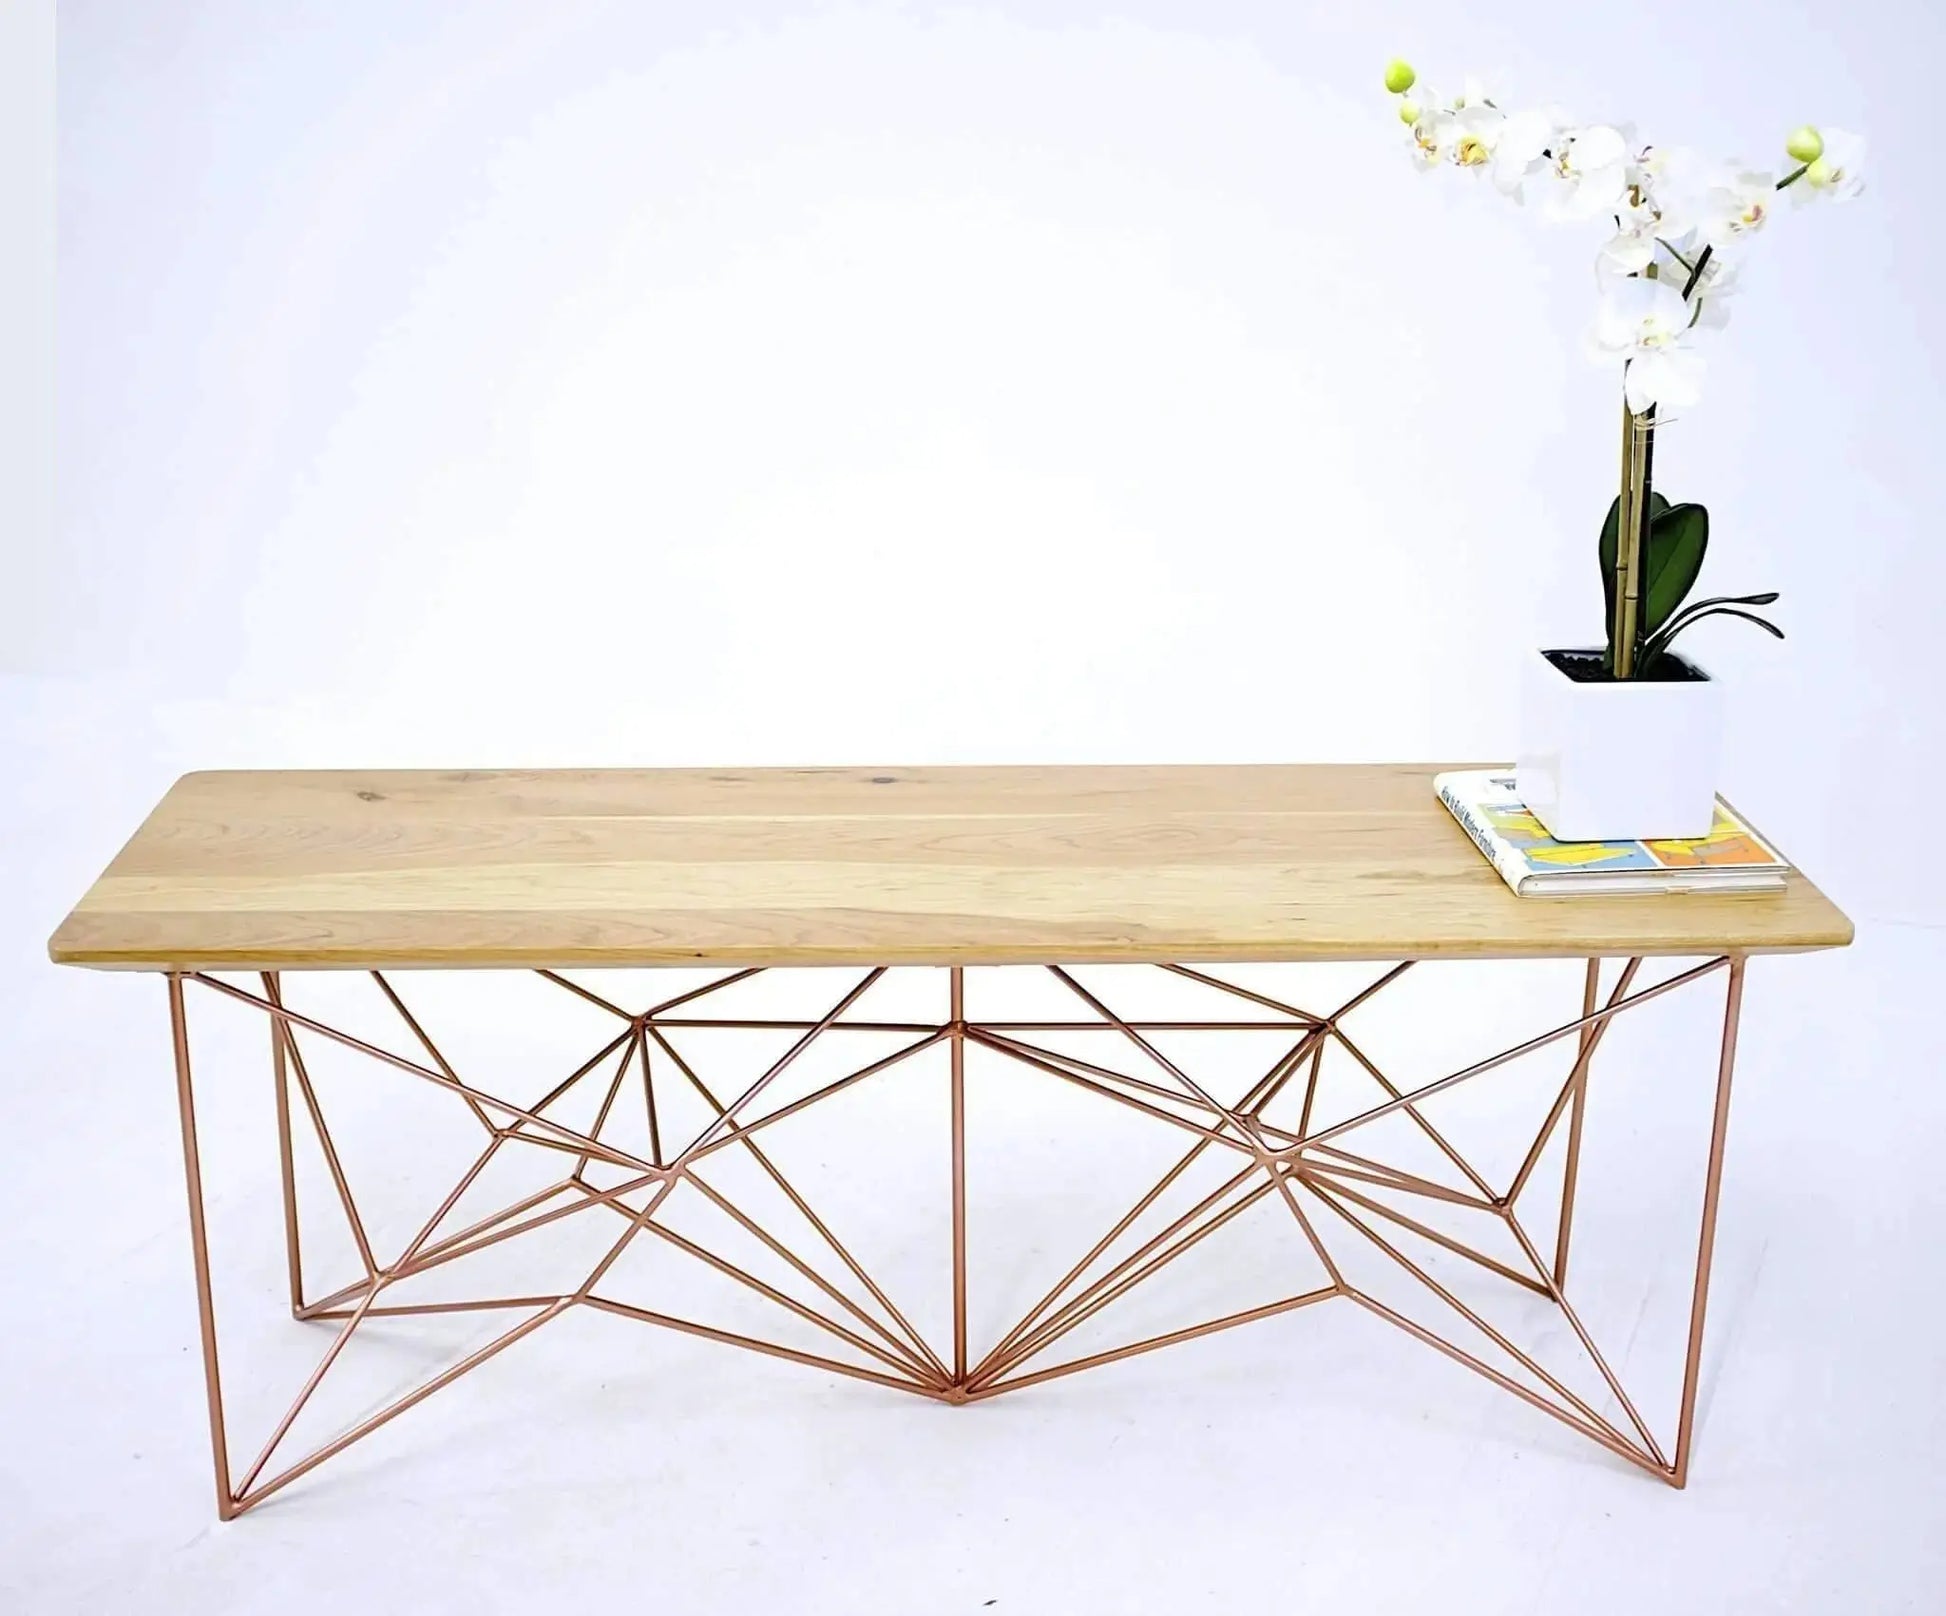 ​The Yoshi: Modern bench for Entryway - Moderncre8ve-Geometric Steel base